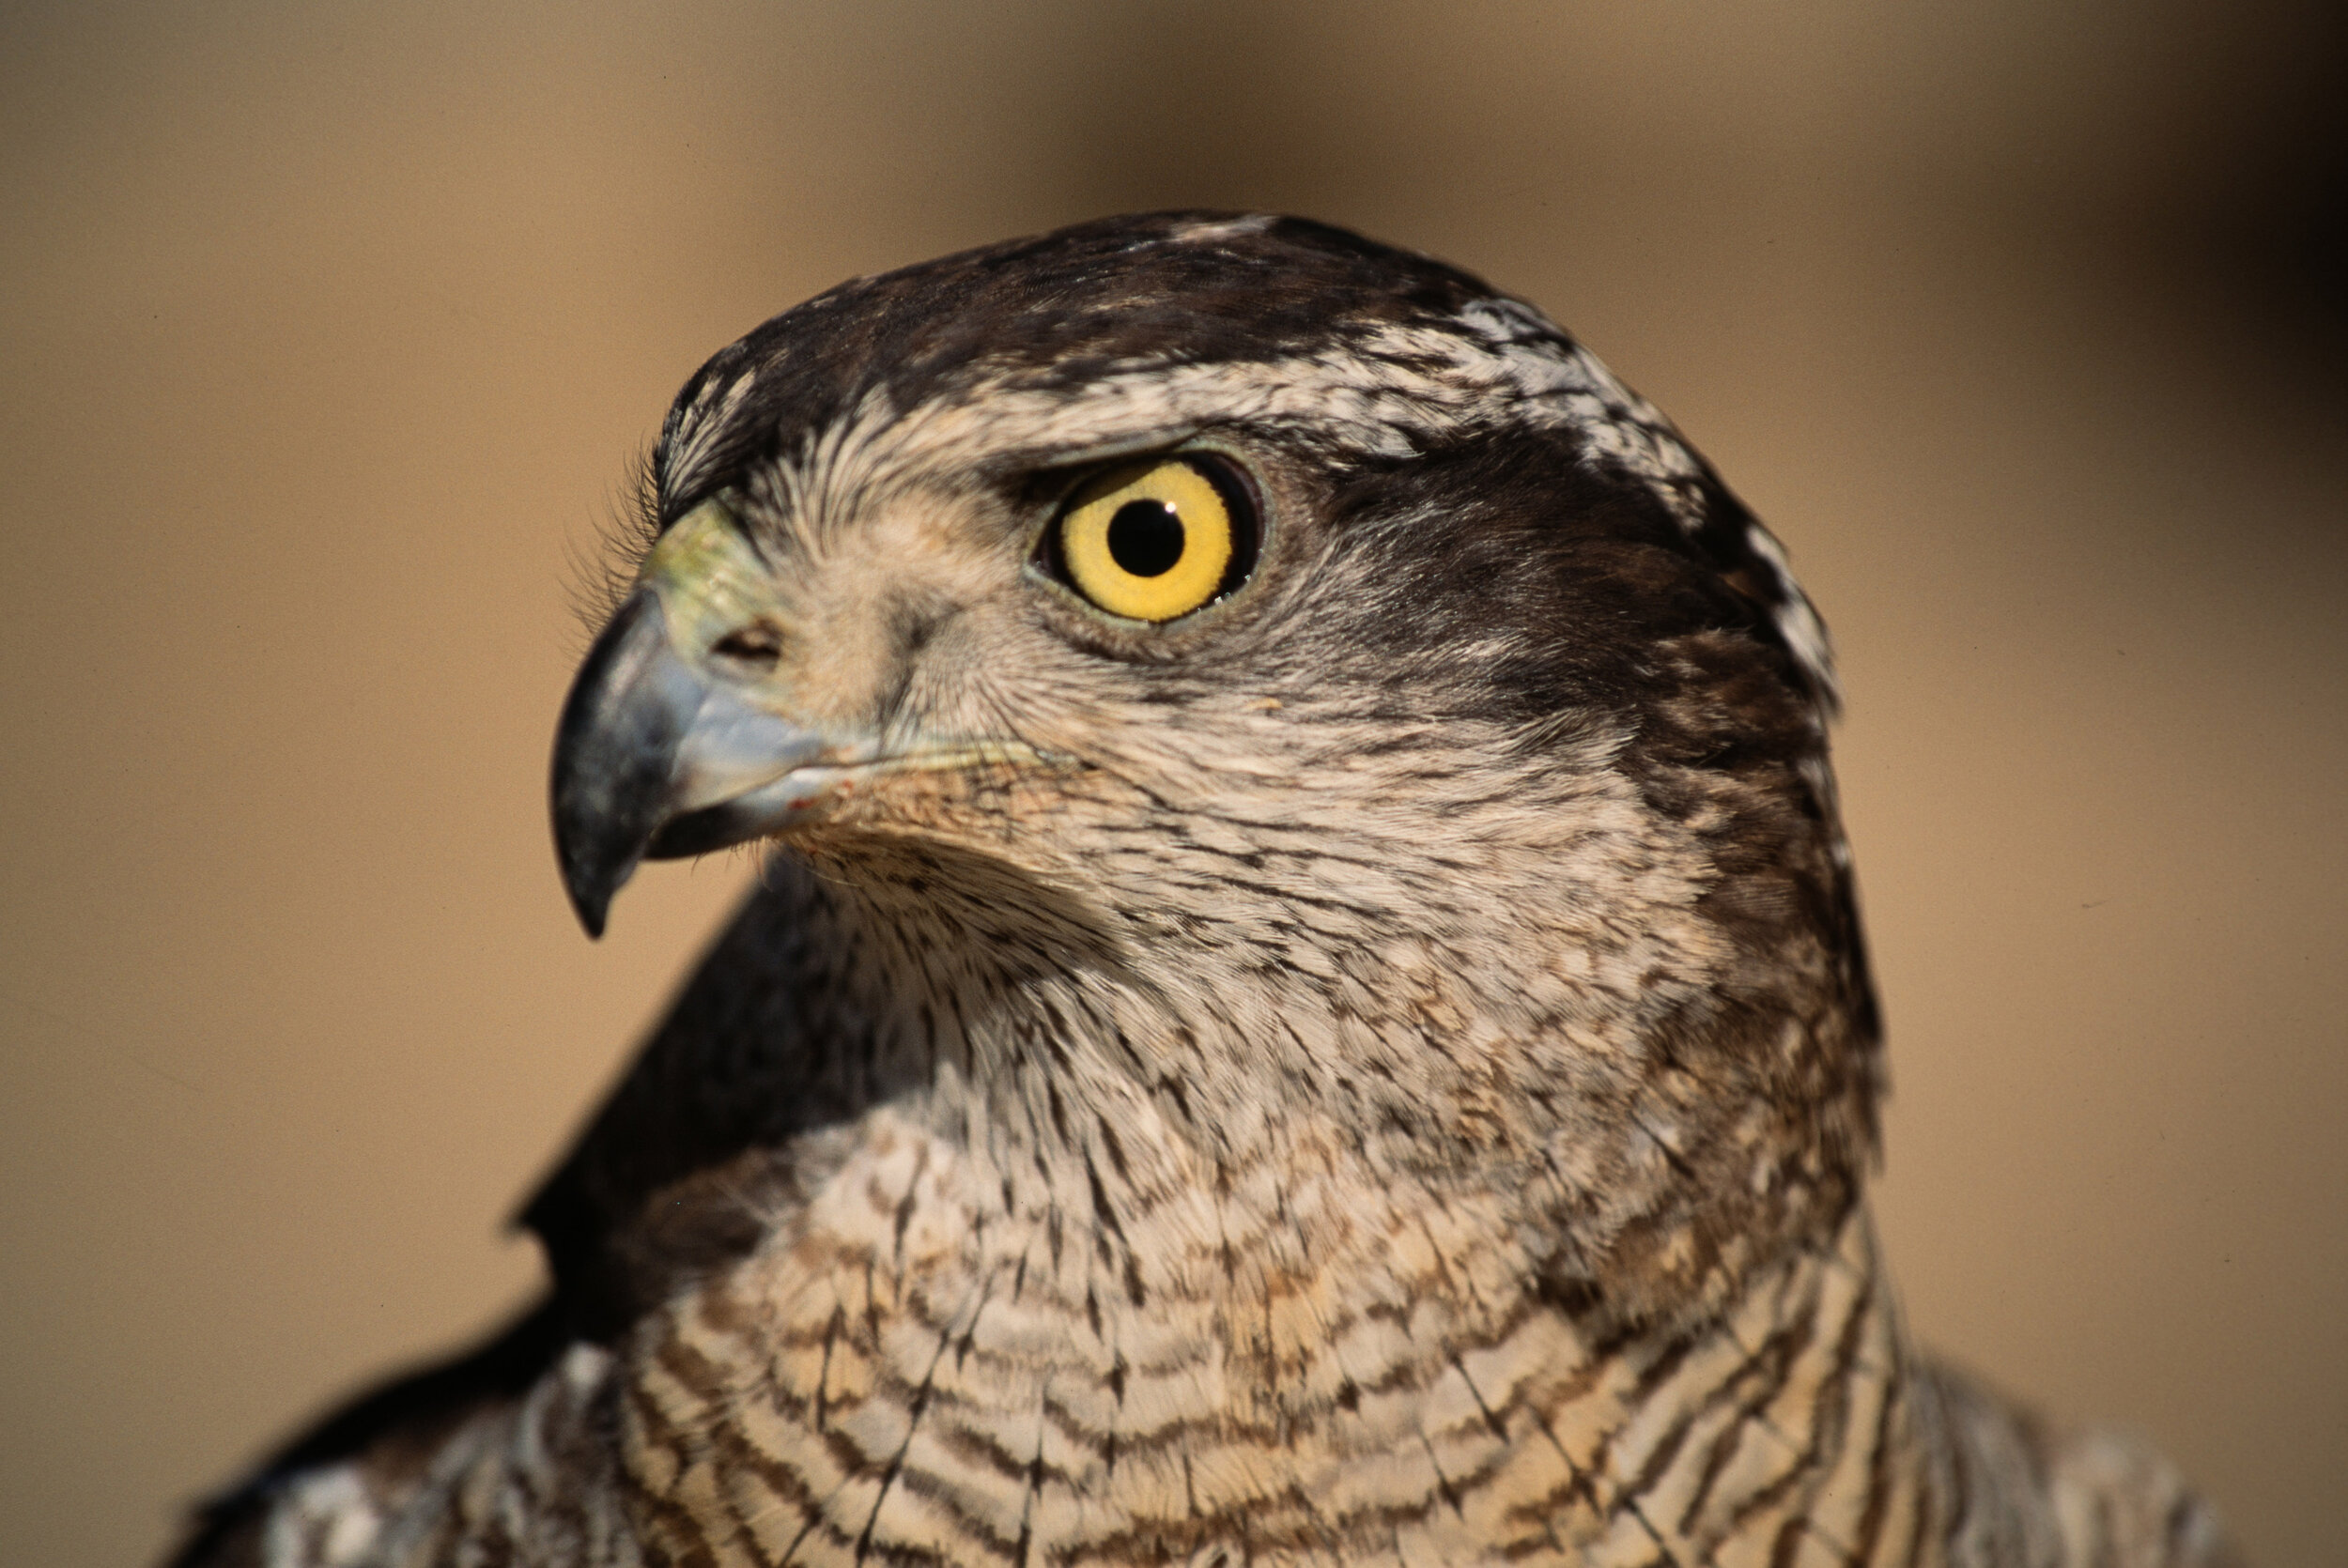  A captive hawk used for hunting in the desert.  